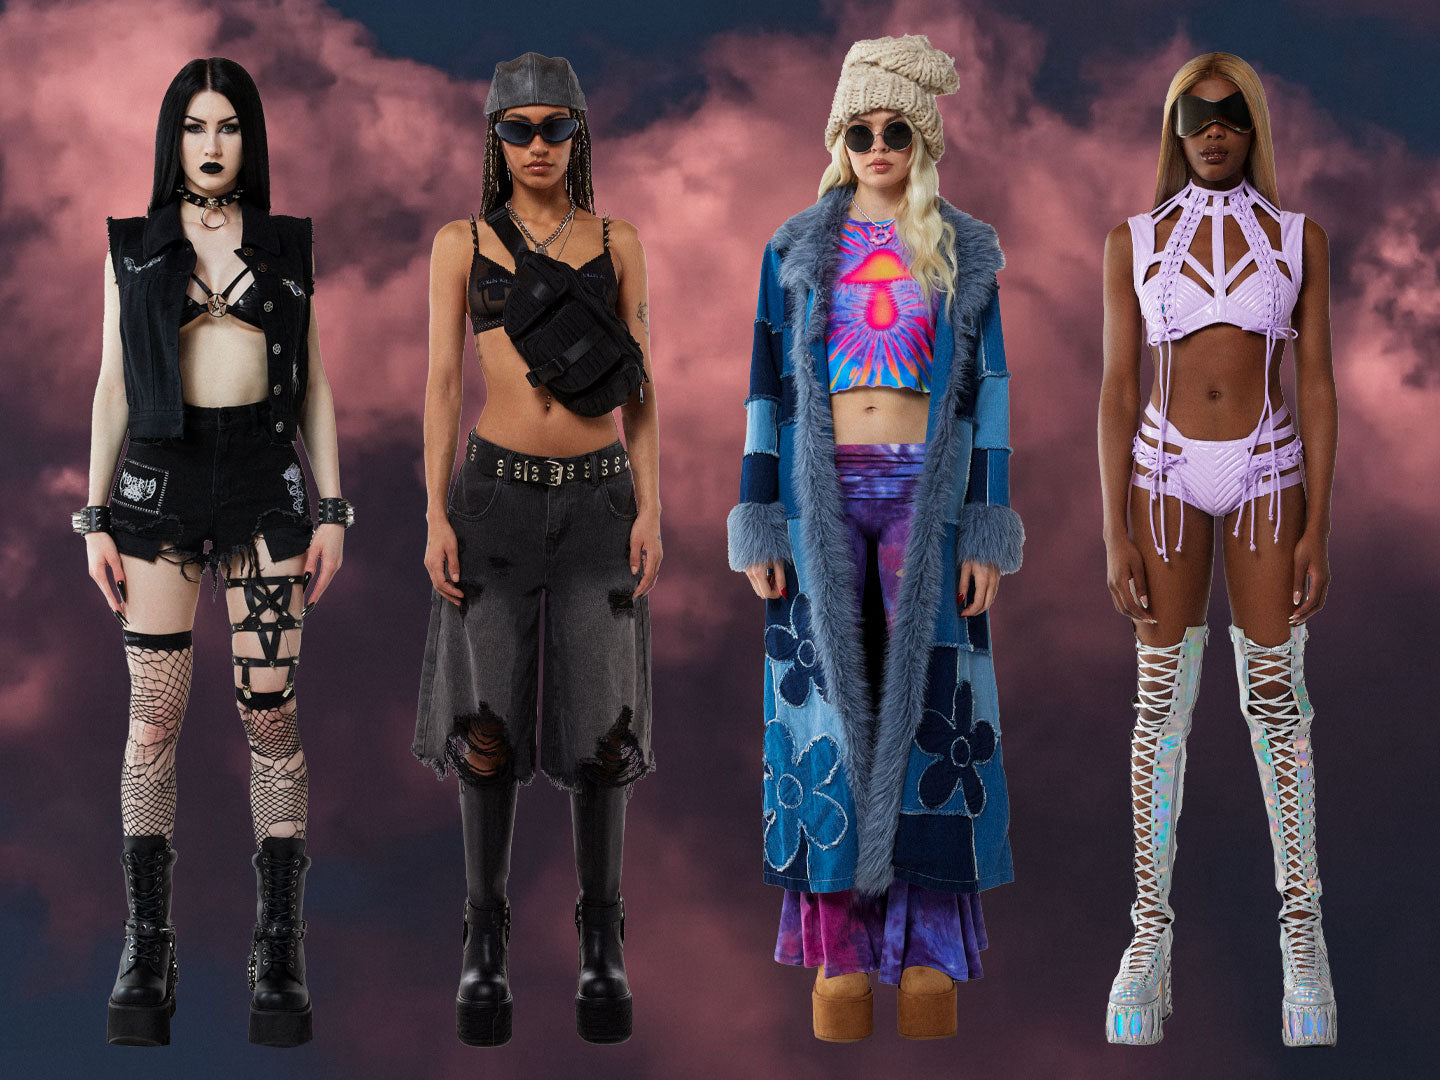 💊💊 Rave Outfits & Gear - Rave Clothing & Rave Wear For Festivals, Dolls  Kill